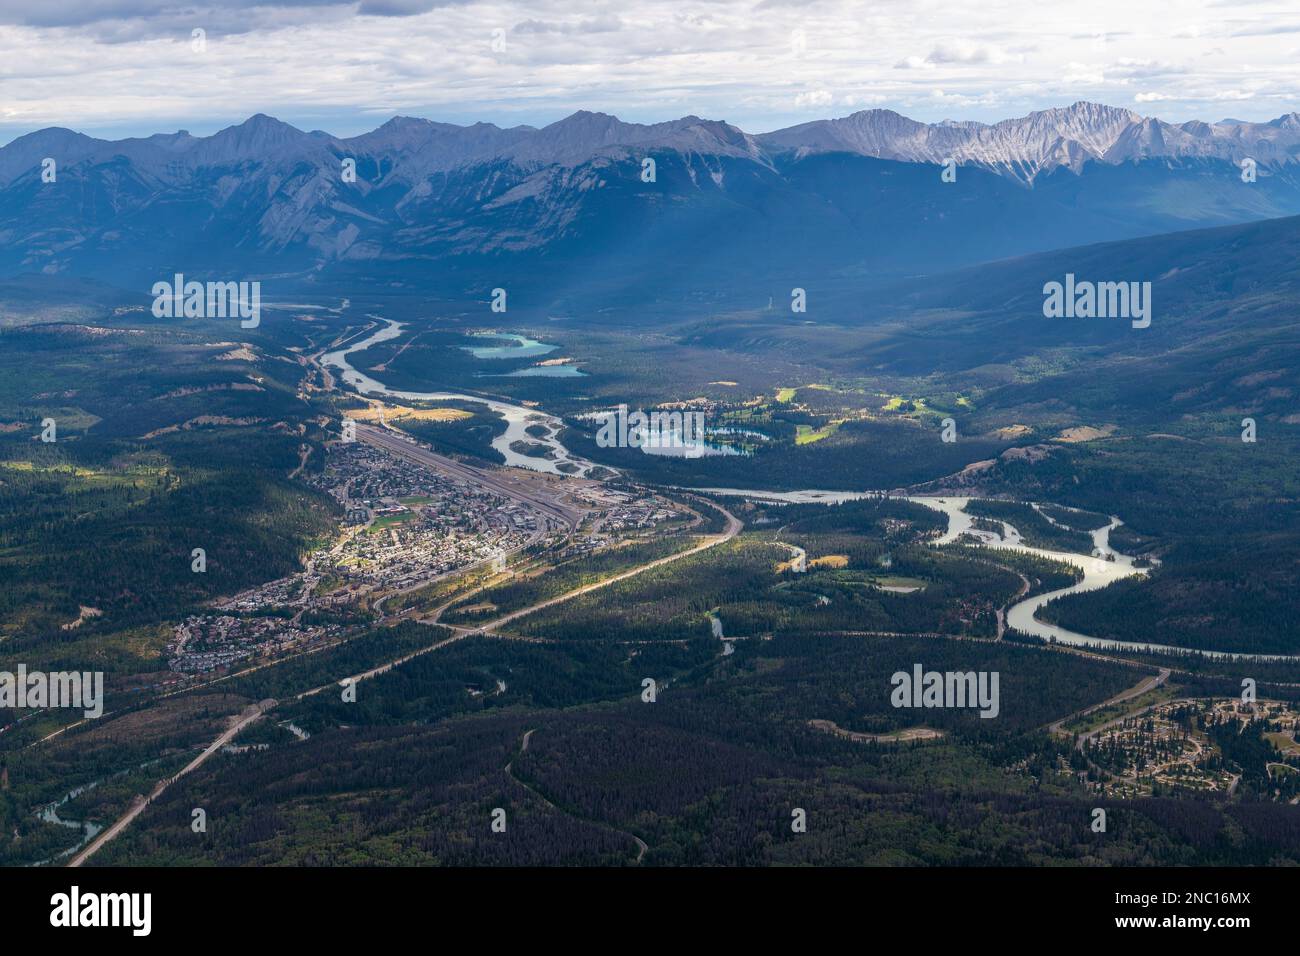 Jasper town and Athabasca river landscape with canadian rockies seen from Whistlers Mountain, Jasper national park, British Columbia, Canada. Stock Photo